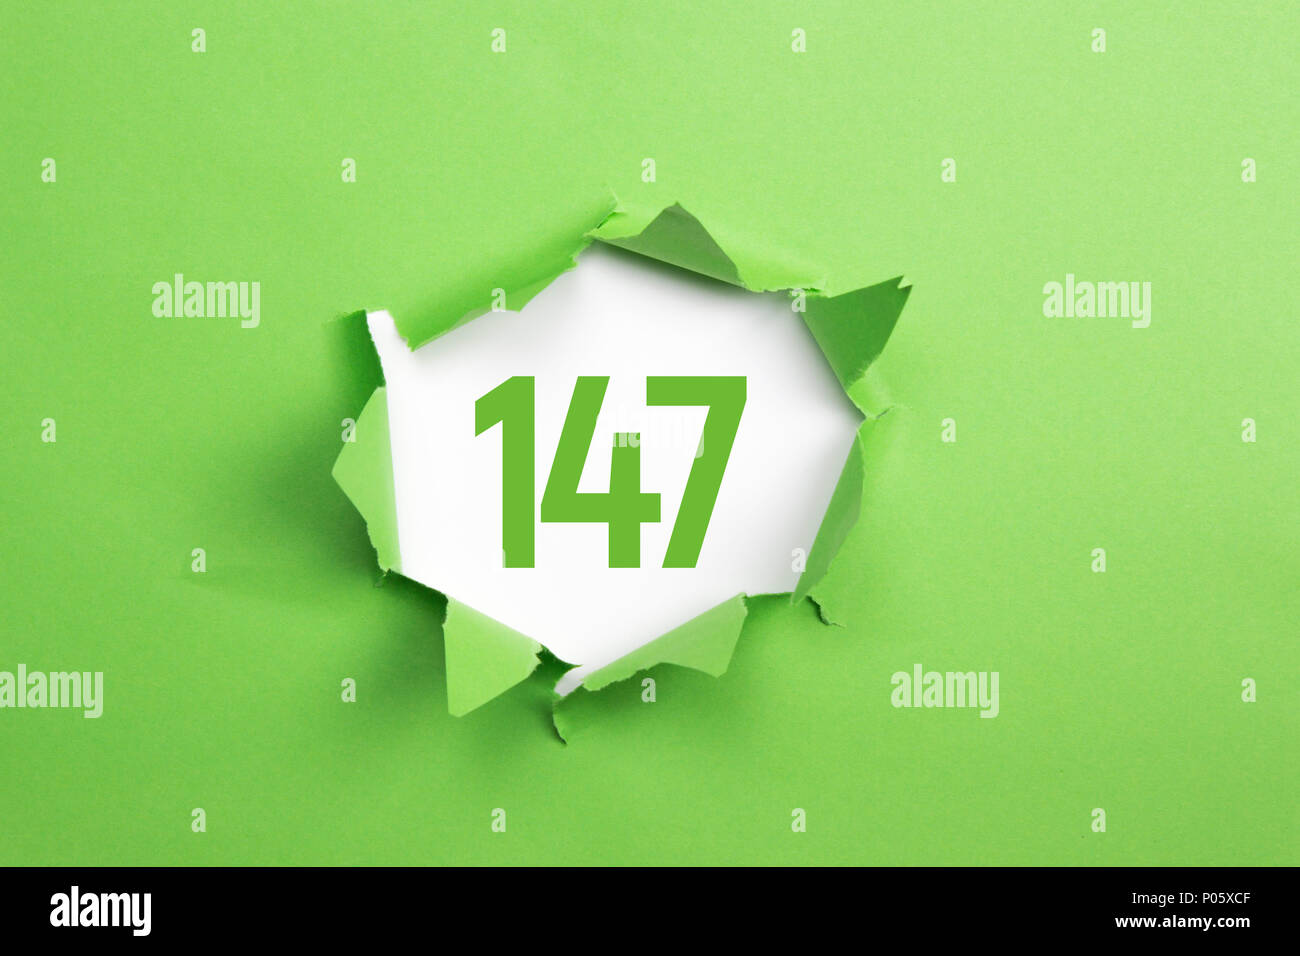 Green Number 203 on green paper background Stock Photo